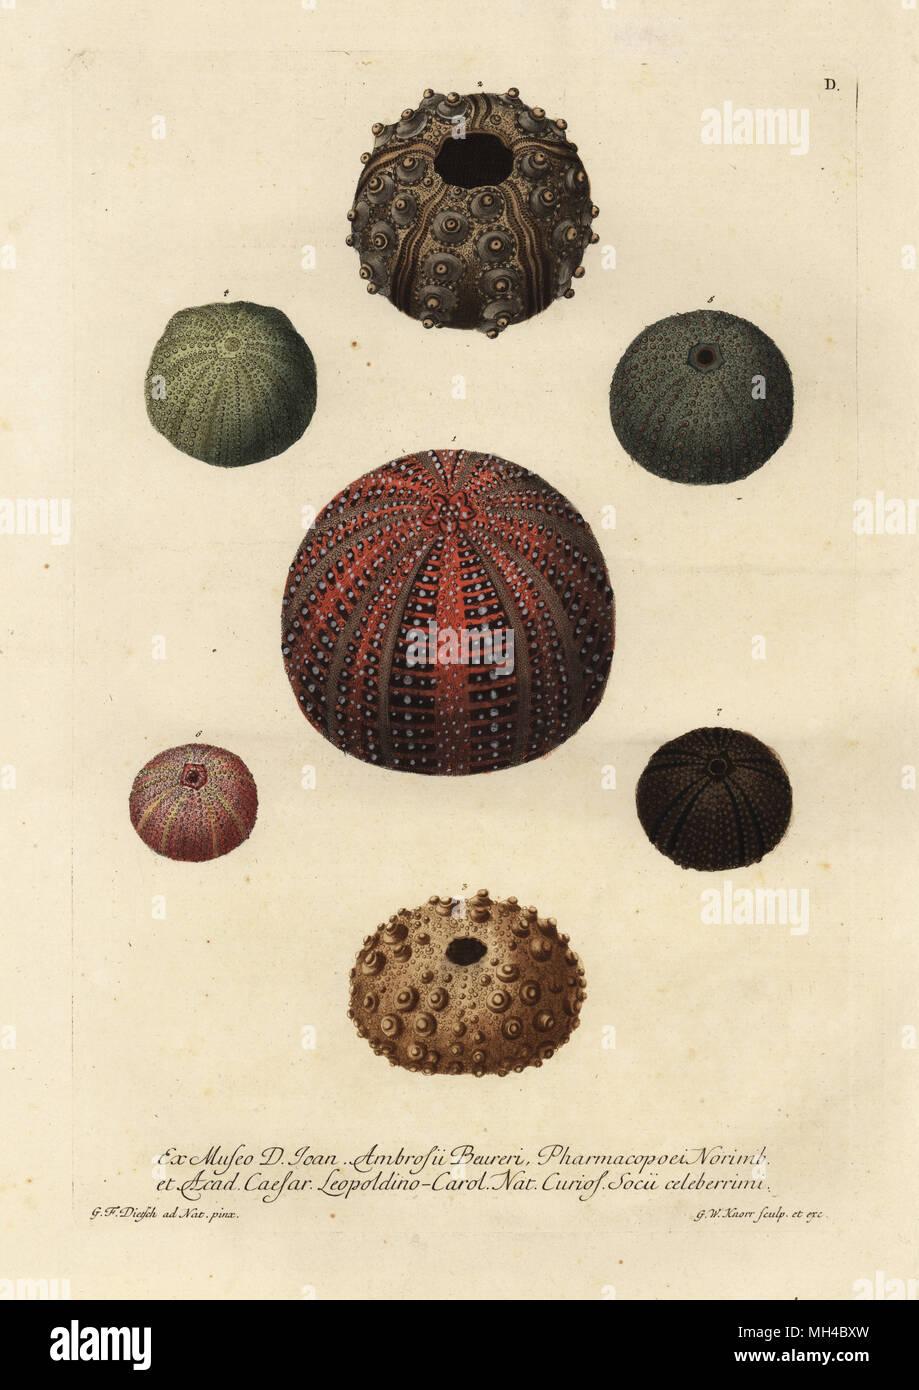 Green sea urchin, Psammechinus miliaris 1,4, Echinometra digitata prima 2, long-spined urchin, Diadema setosum 3, and other varieties. Handcoloured copperplate engraving by G.W. Knorr after an illustration by G.F. Dietsch from Georg Wolfgang Knorr's Deliciae Naturae Selectae of Kabinet van Zeldzaamheden der Natuur, Blusse and Son, Nuremberg, 1771. Specimens from a Wunderkammer or Cabinet of Curiosities of Johann Ambrosius Beurer. Stock Photo